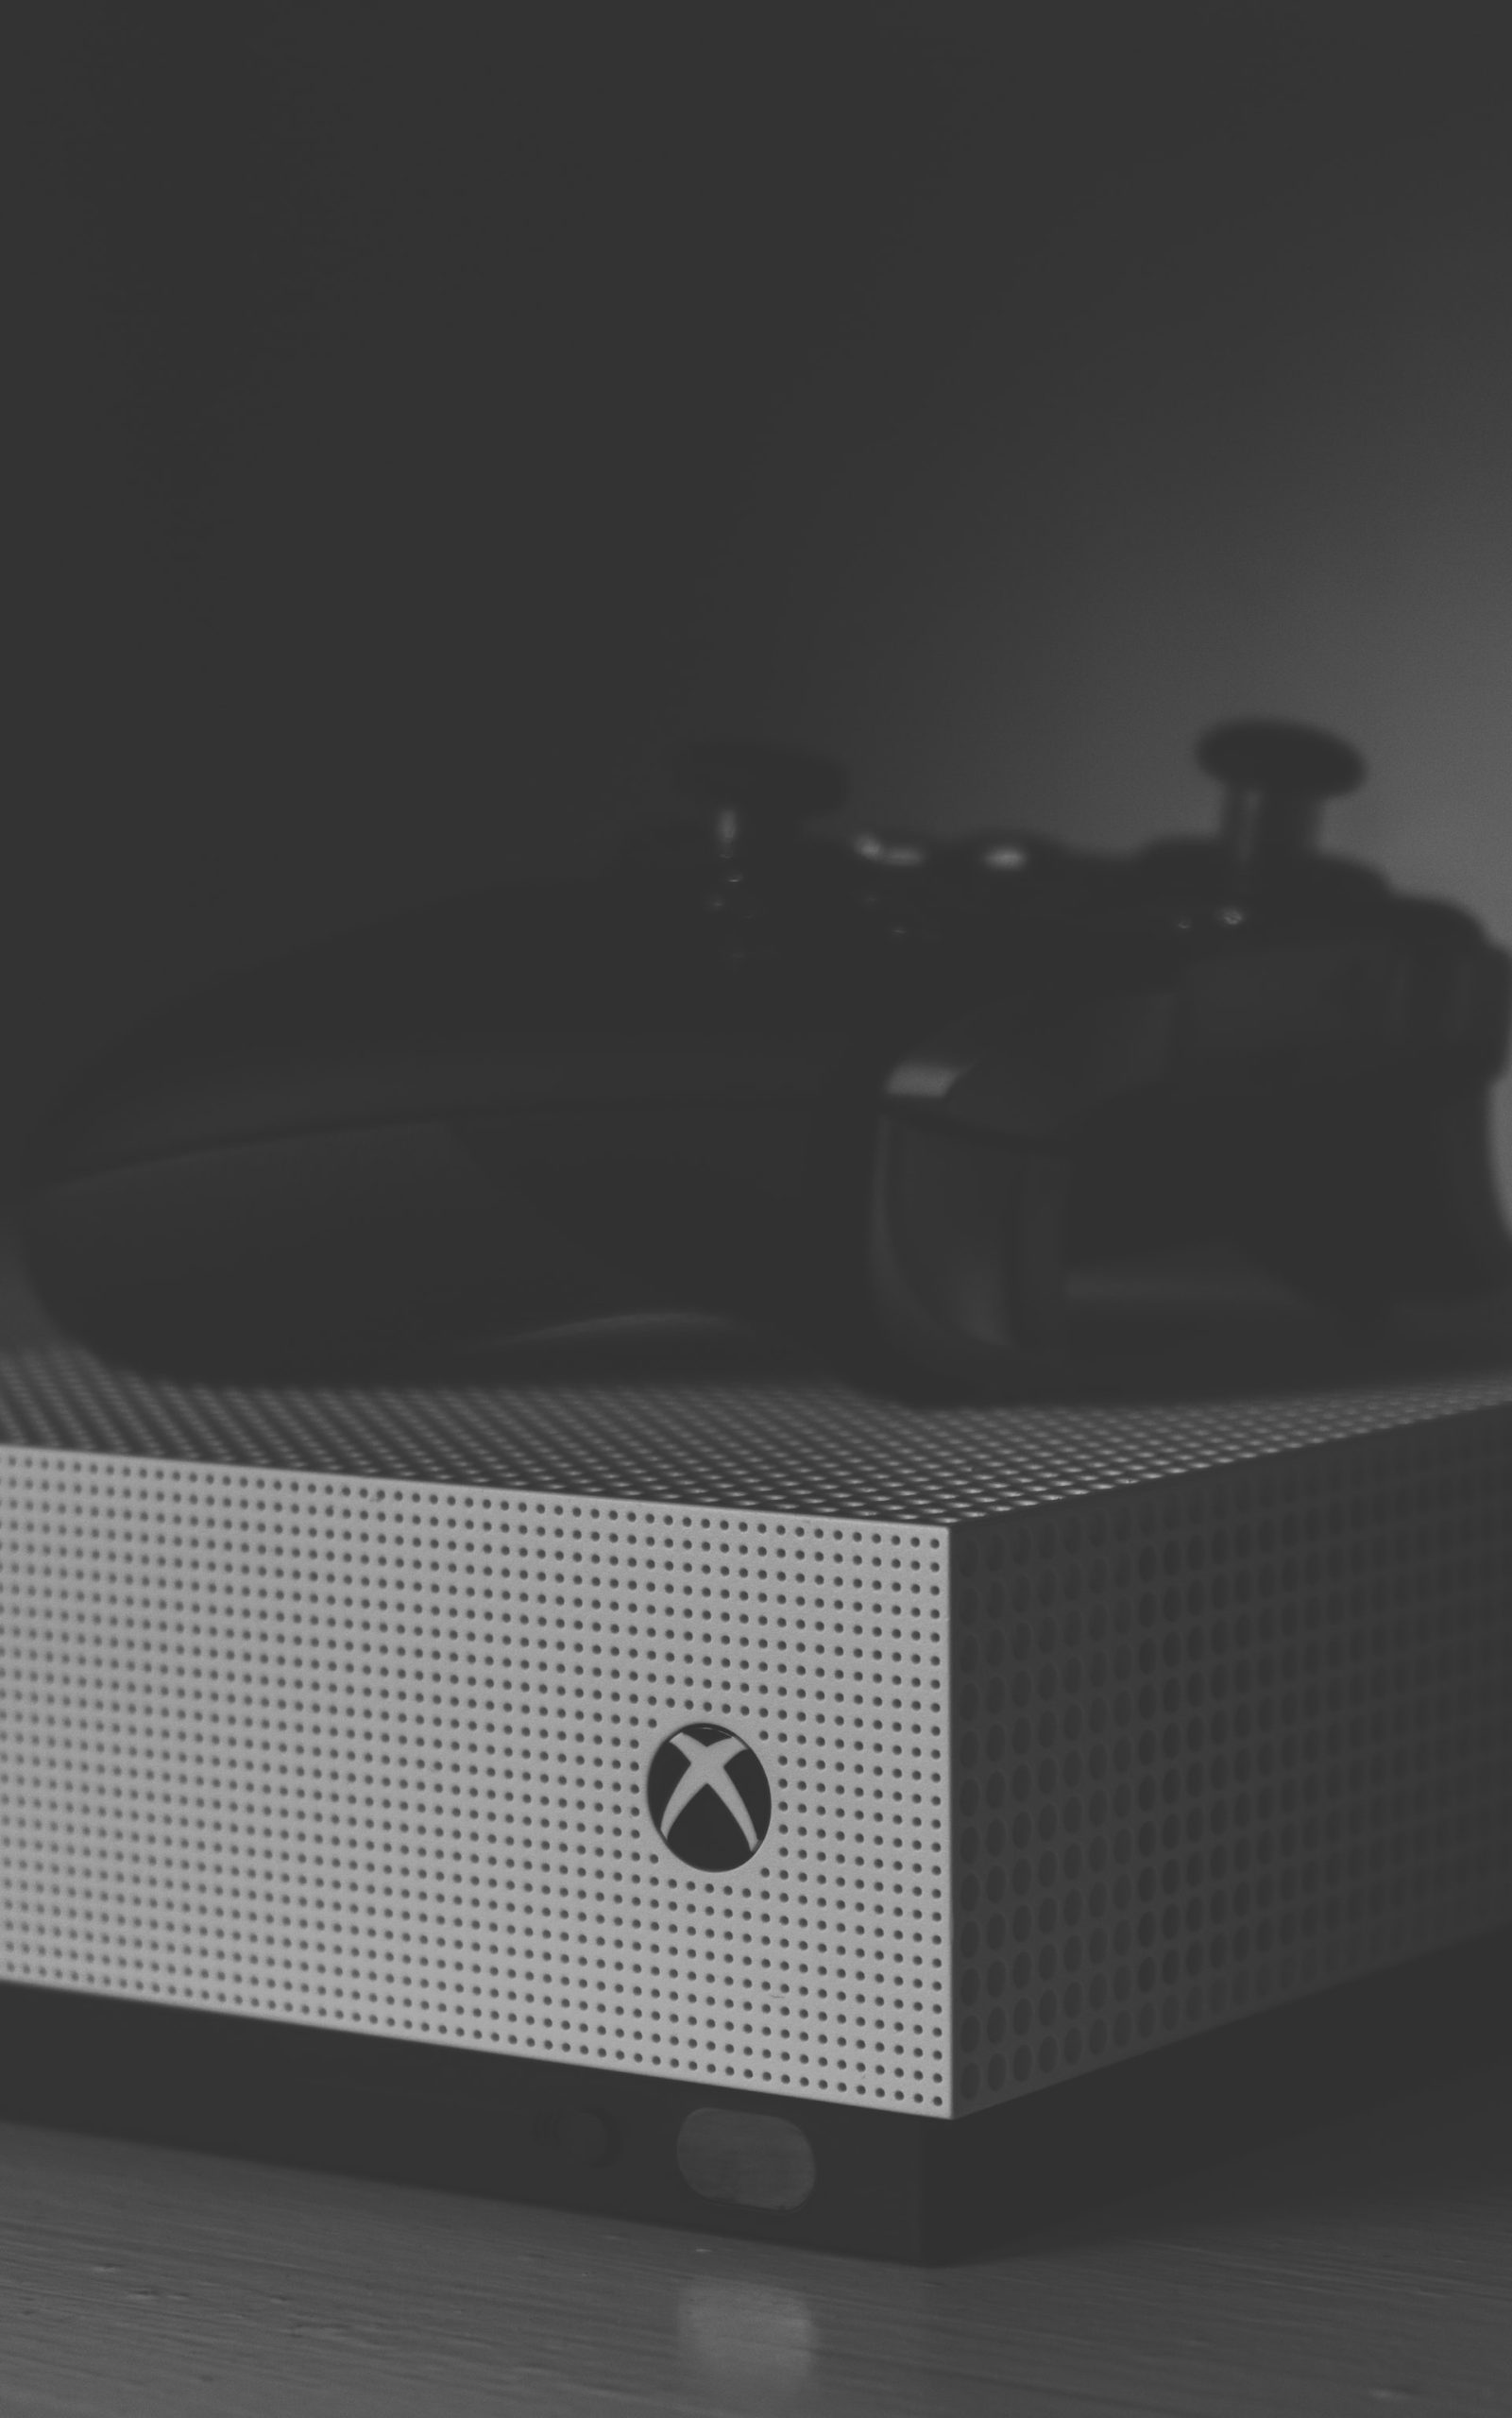 Xbox One Won’t Turn On? Here’s how to fix it